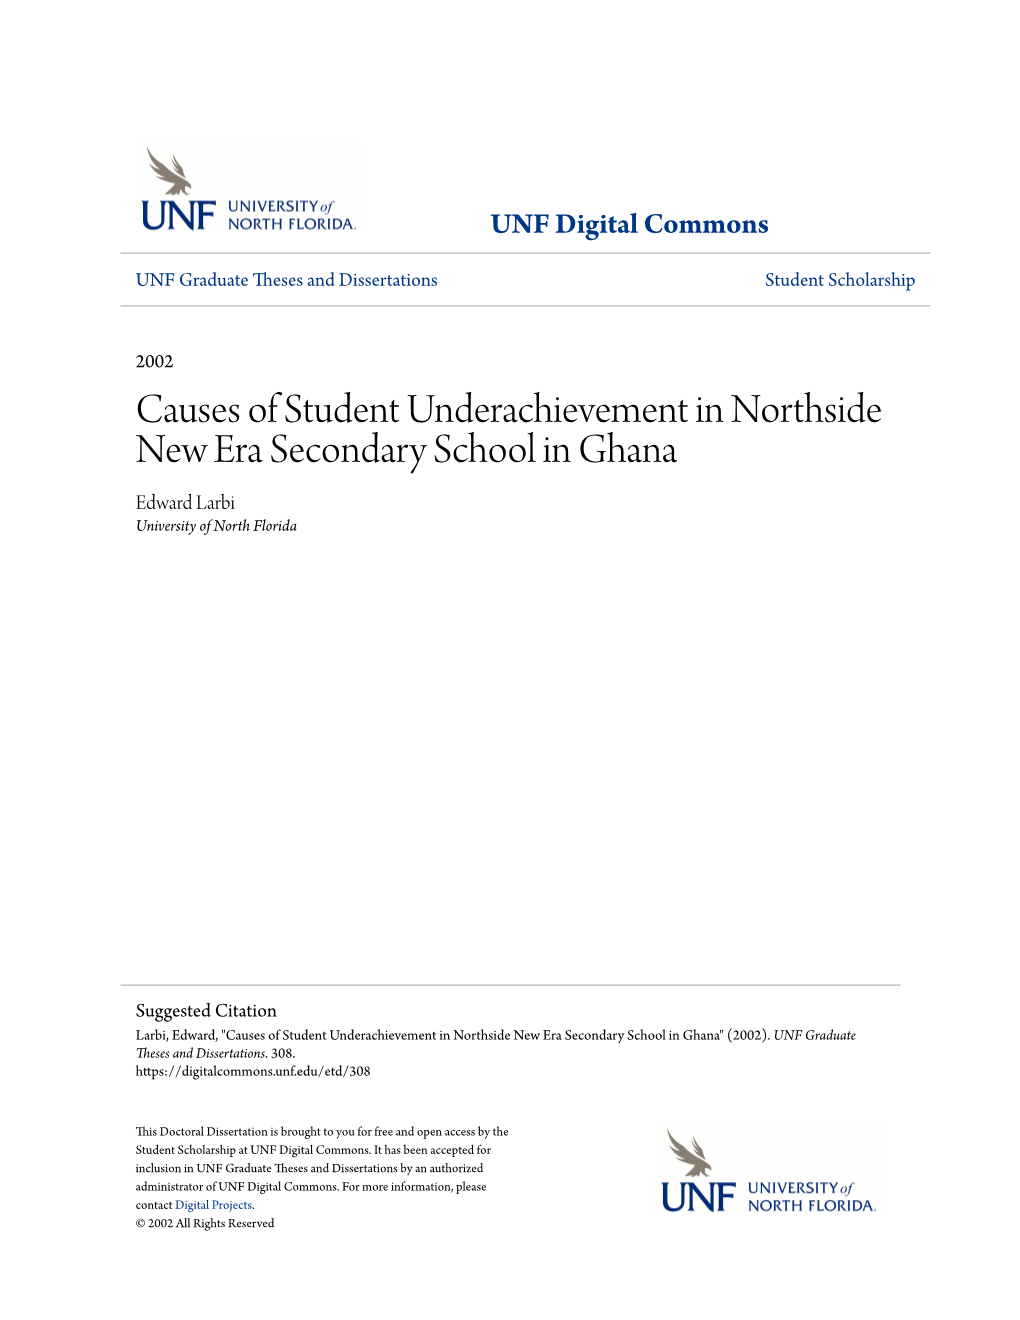 Causes of Student Underachievement in Northside New Era Secondary School in Ghana Edward Larbi University of North Florida